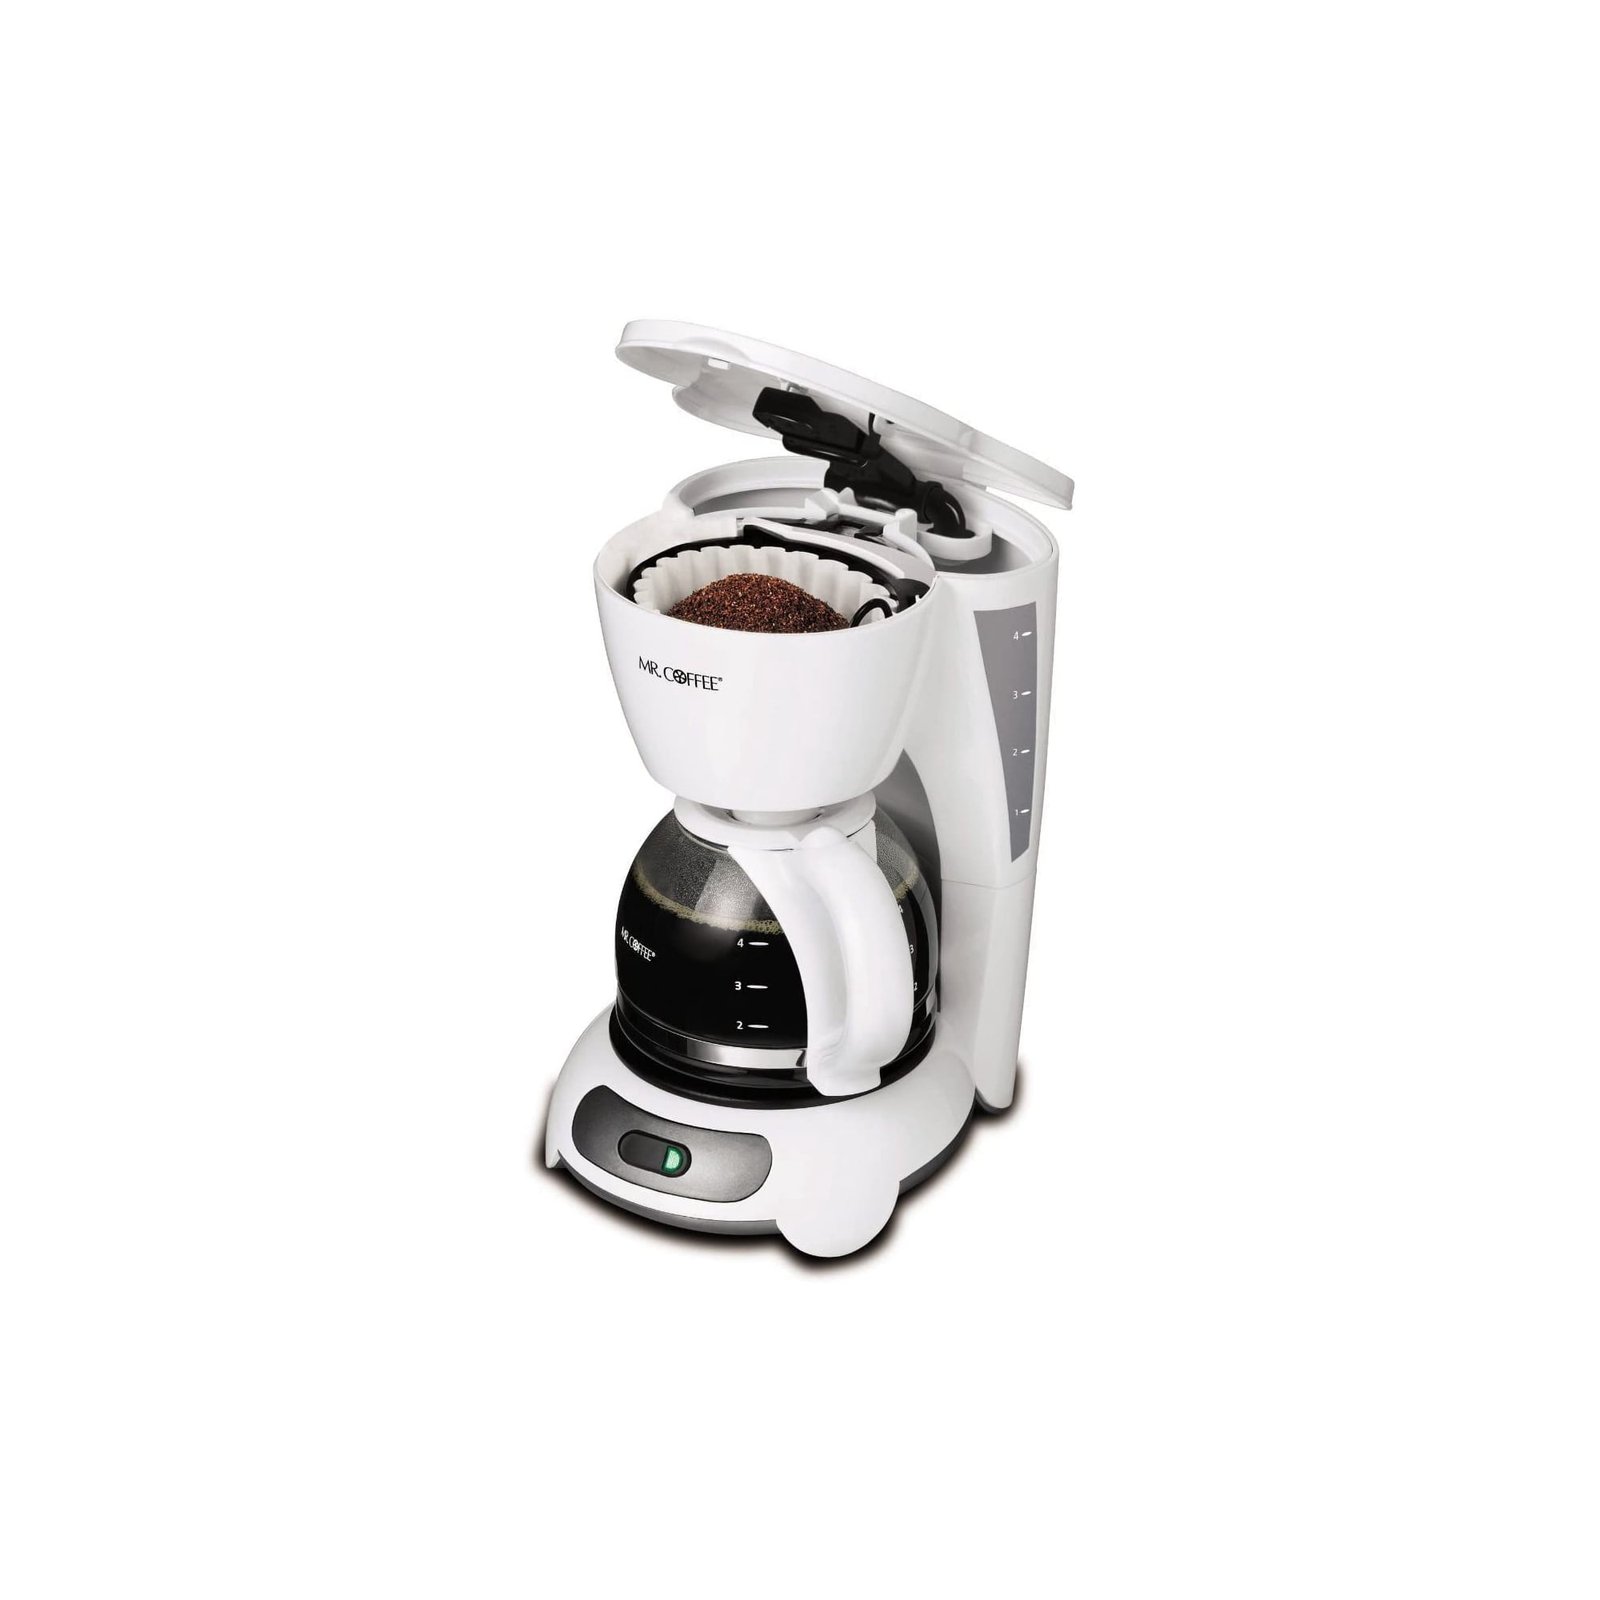 Mr. Coffee 4-Cup Coffee Maker Automatic Shut-Off Pause 'n Serve